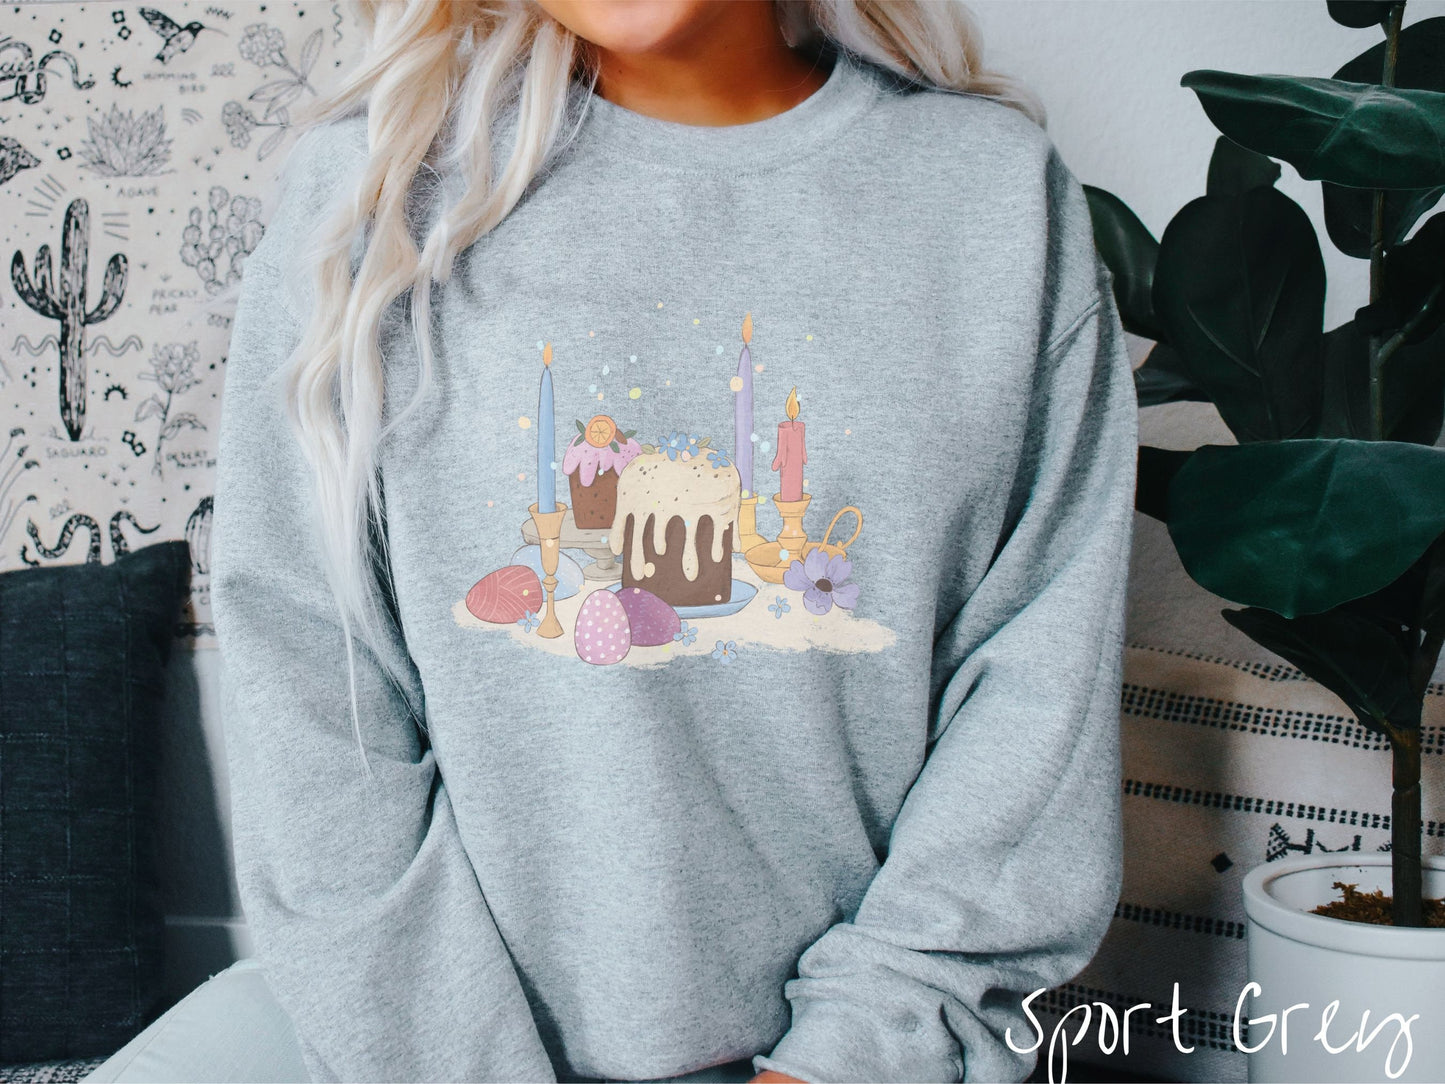 A woman wearing a cute, vintage sport grey colored sweatshirt with an assortment of colorful candles with wax running down the sides in the center, scattered around the candles are pink, purple, red, and blue colored Easter eggs.